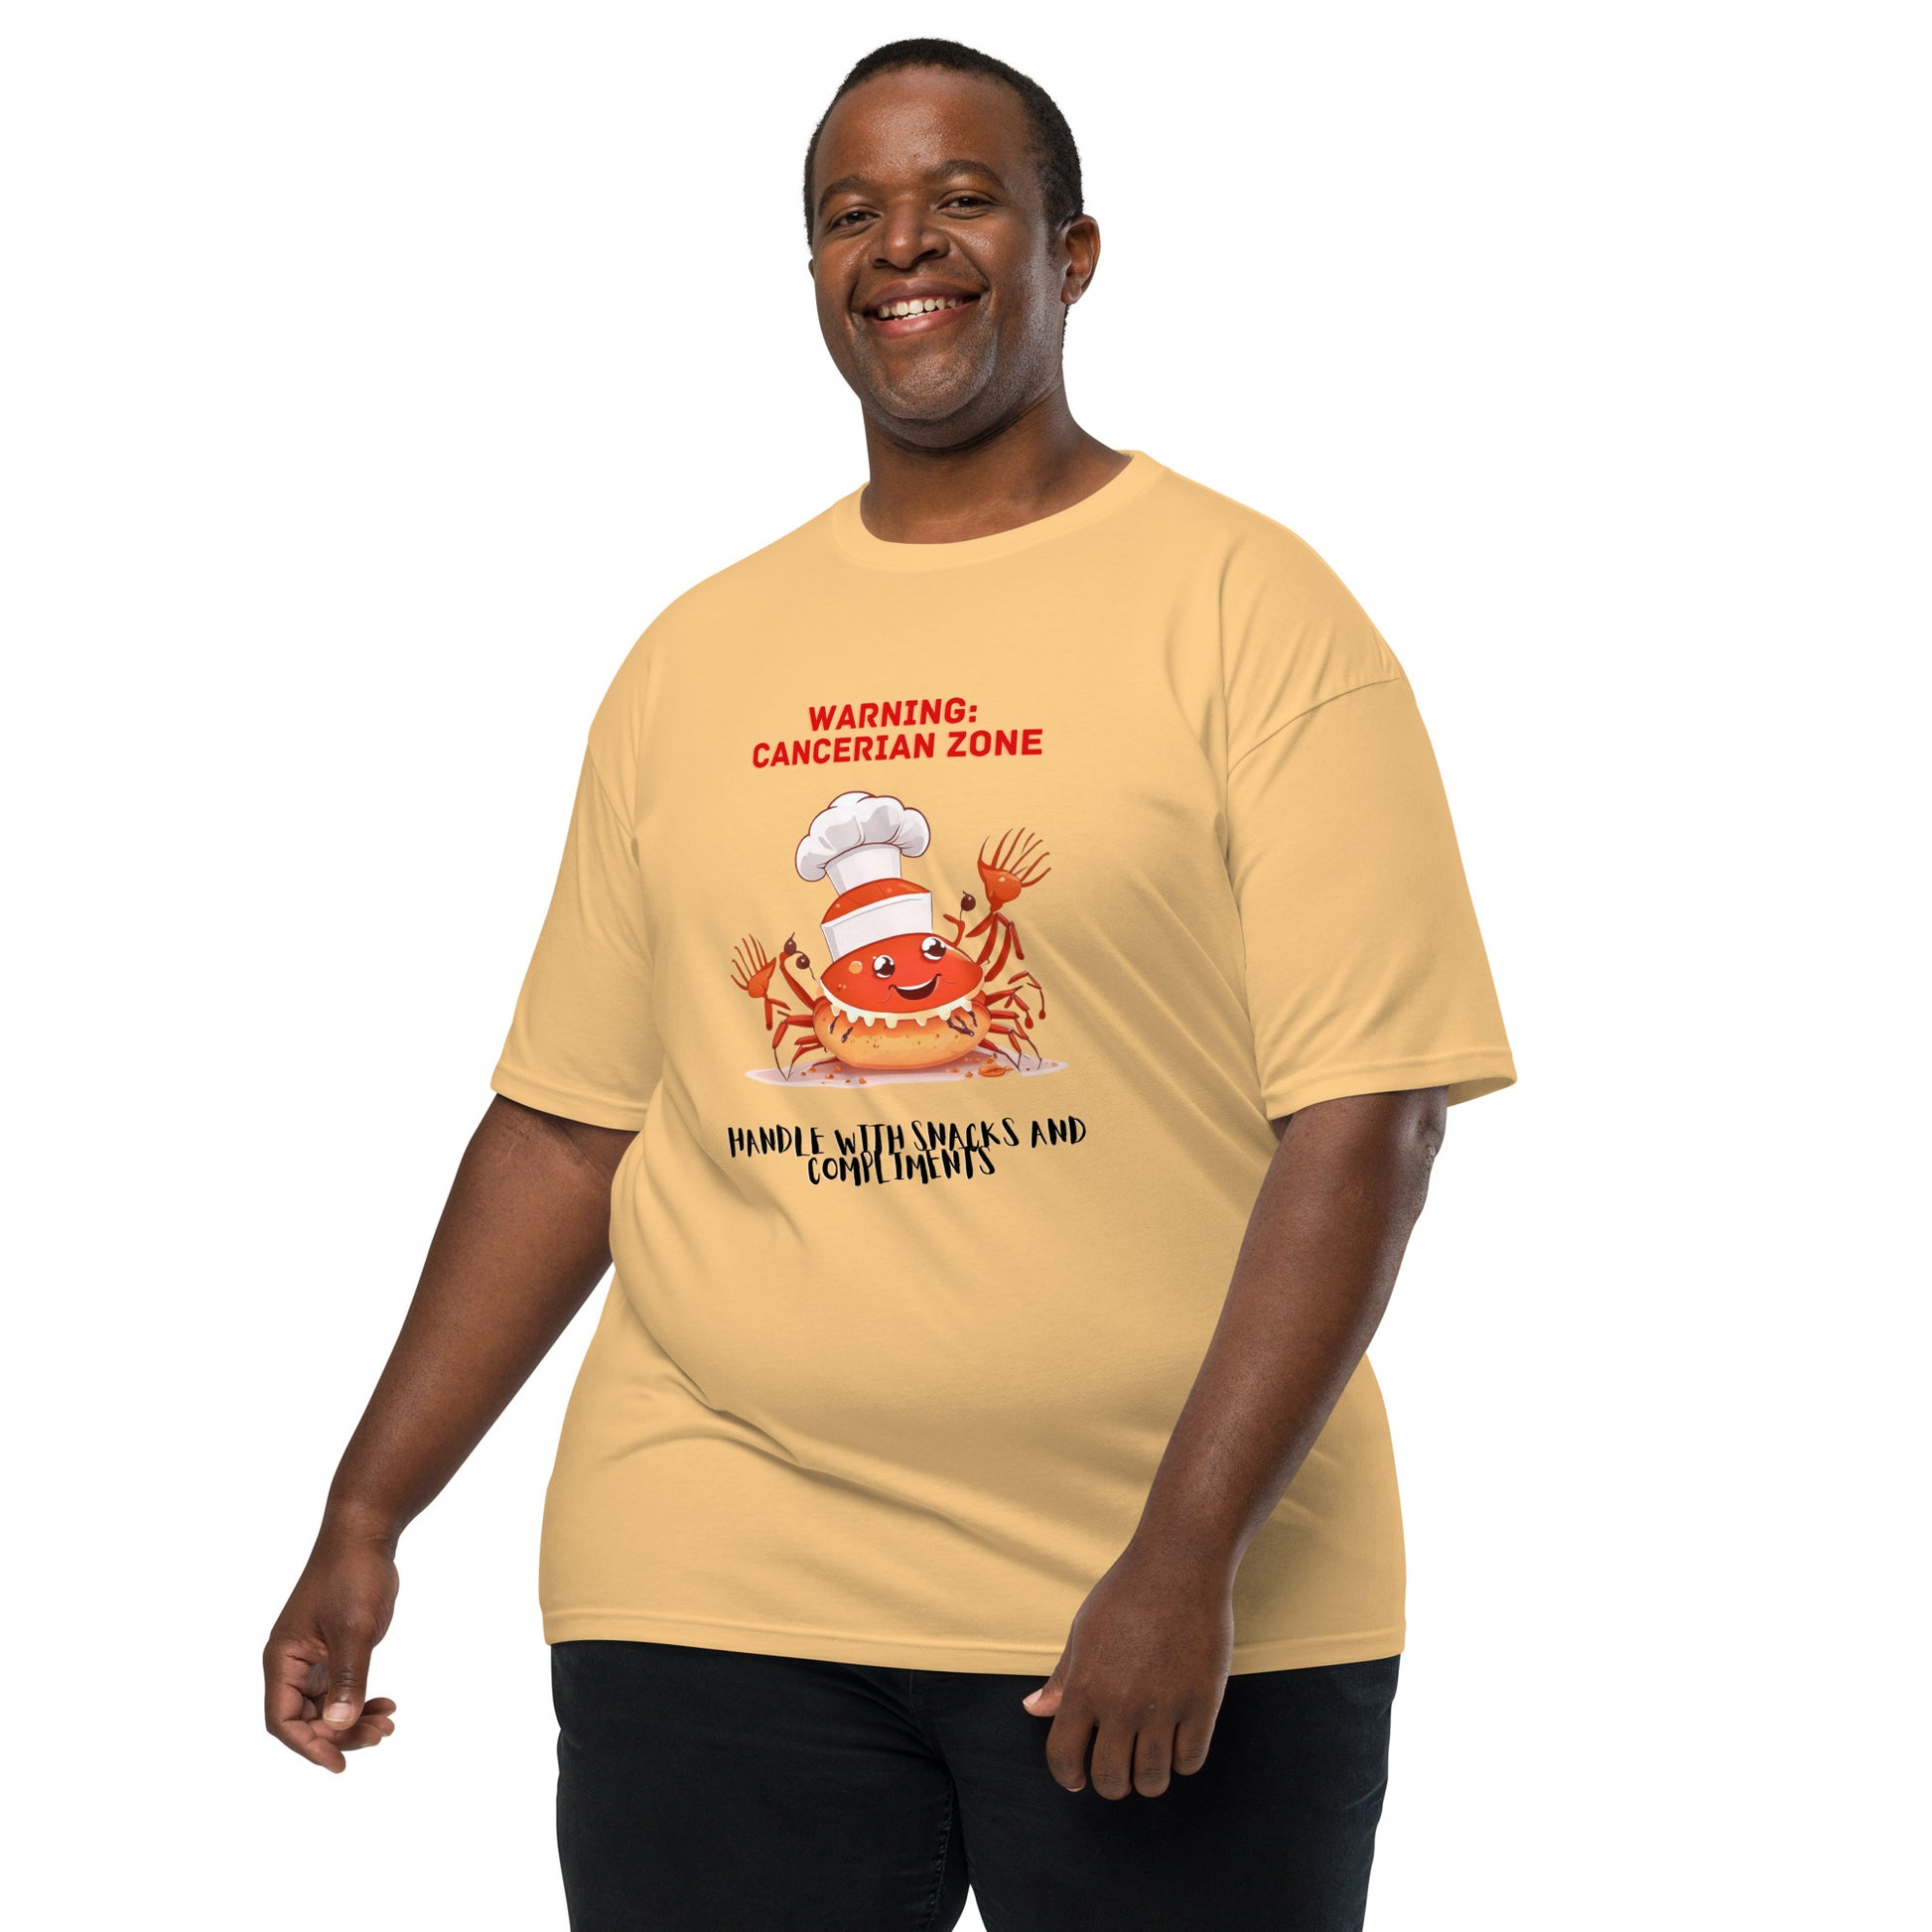 Buy best cancerian shirts at Mighty Expressions